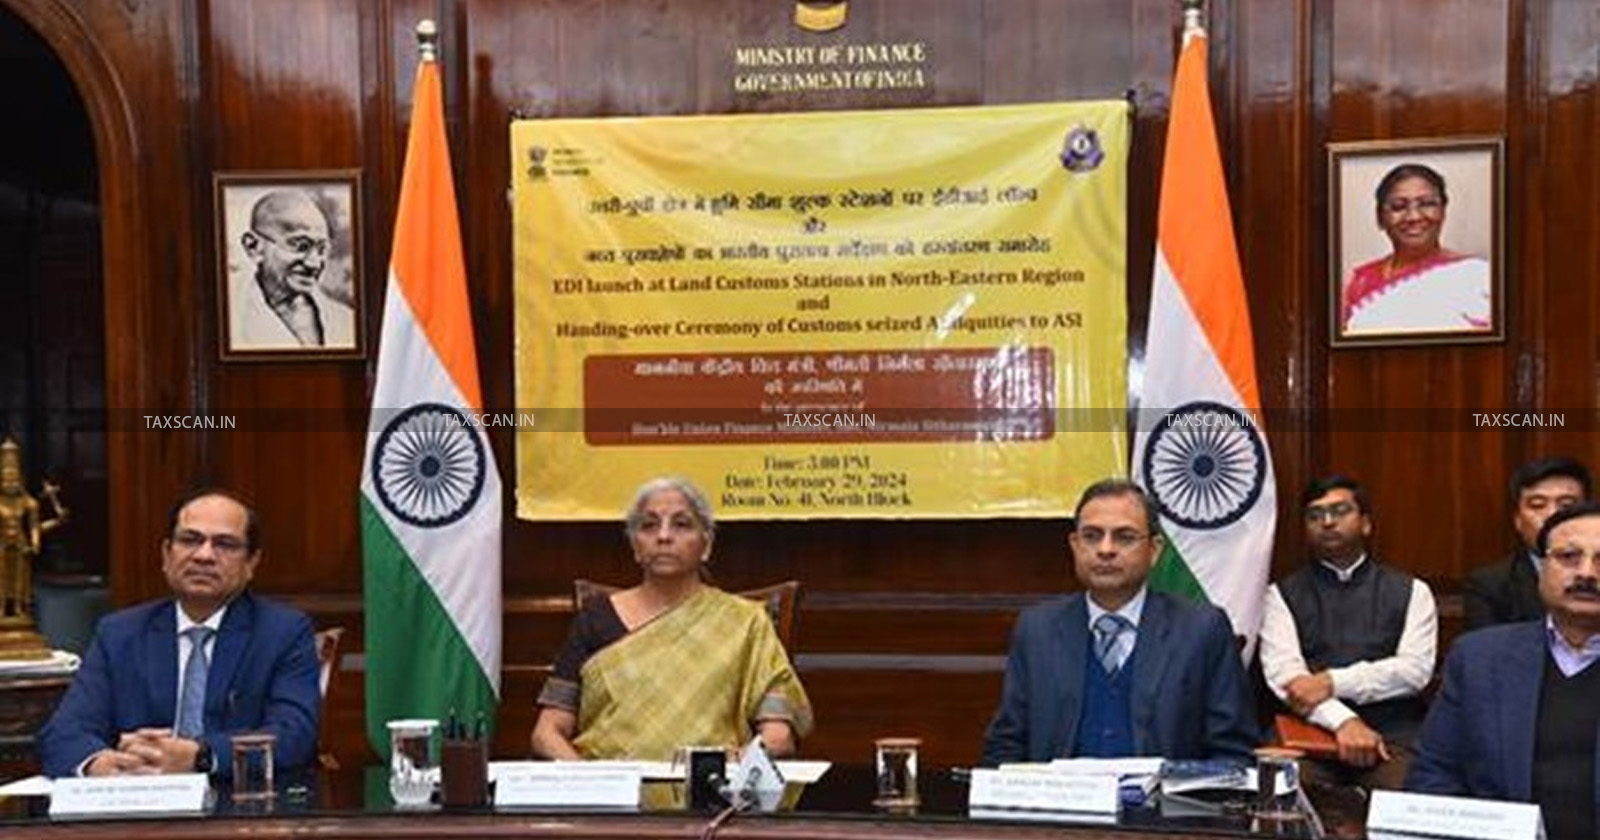 FM Launches Electronic Data Interchange (EDI) at Remote Land Customs Stations - Northeast States - TAXSCAN